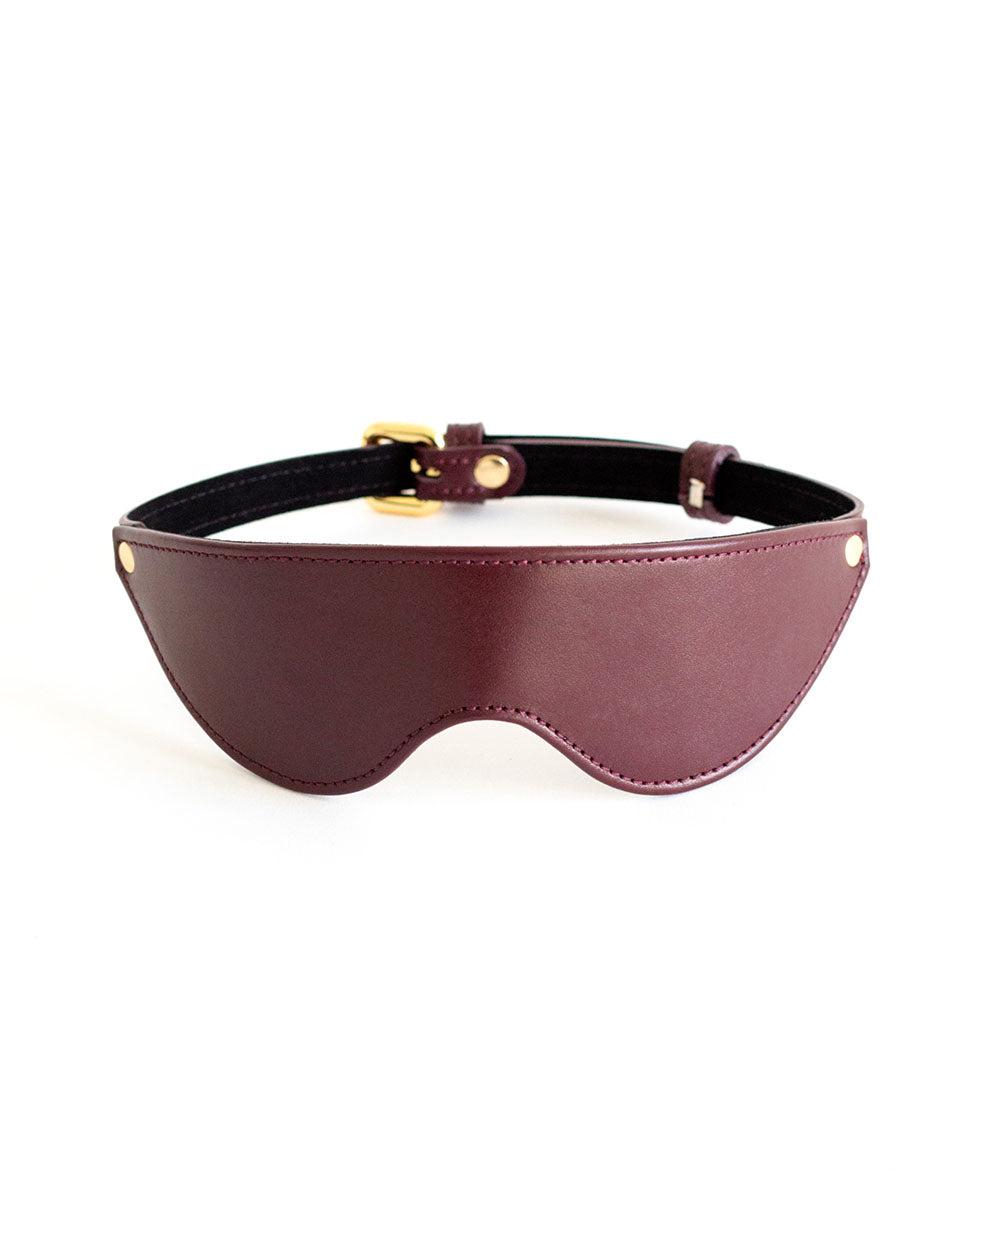 blindfold mask burgundy leather by anoeses